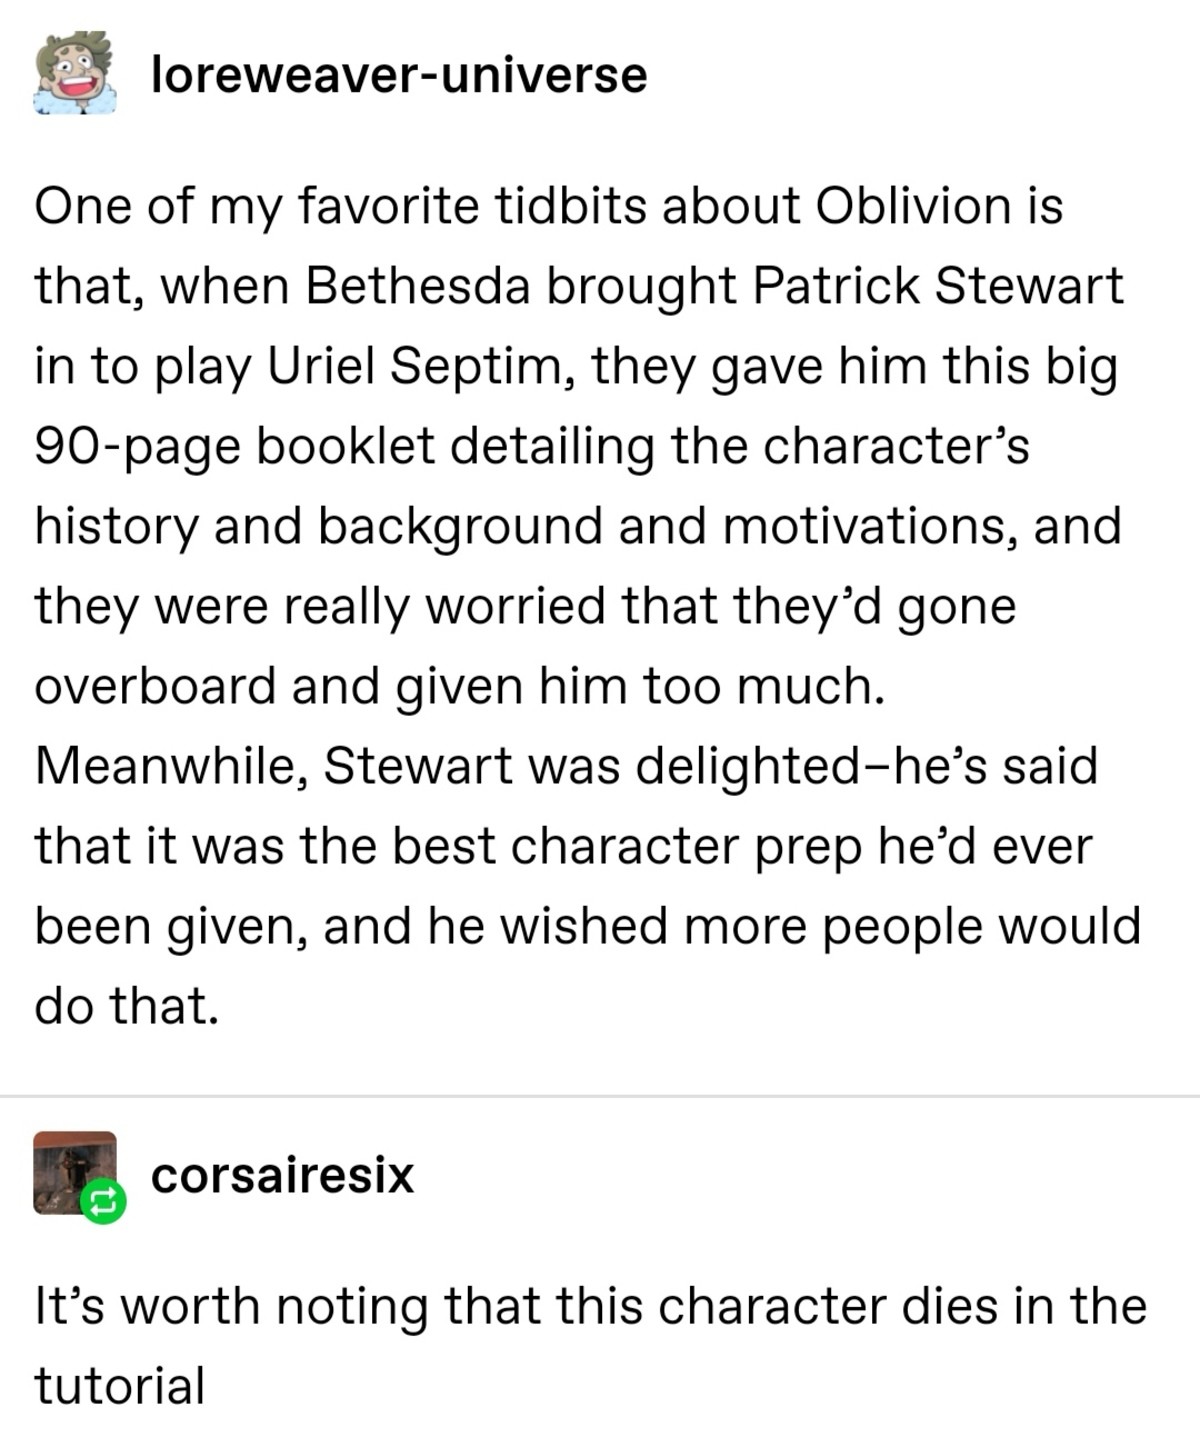 angle - loreweaveruniverse One of my favorite tidbits about Oblivion is that, when Bethesda brought Patrick Stewart in to play Uriel Septim, they gave him this big 90page booklet detailing the character's history and background and motivations, and they w